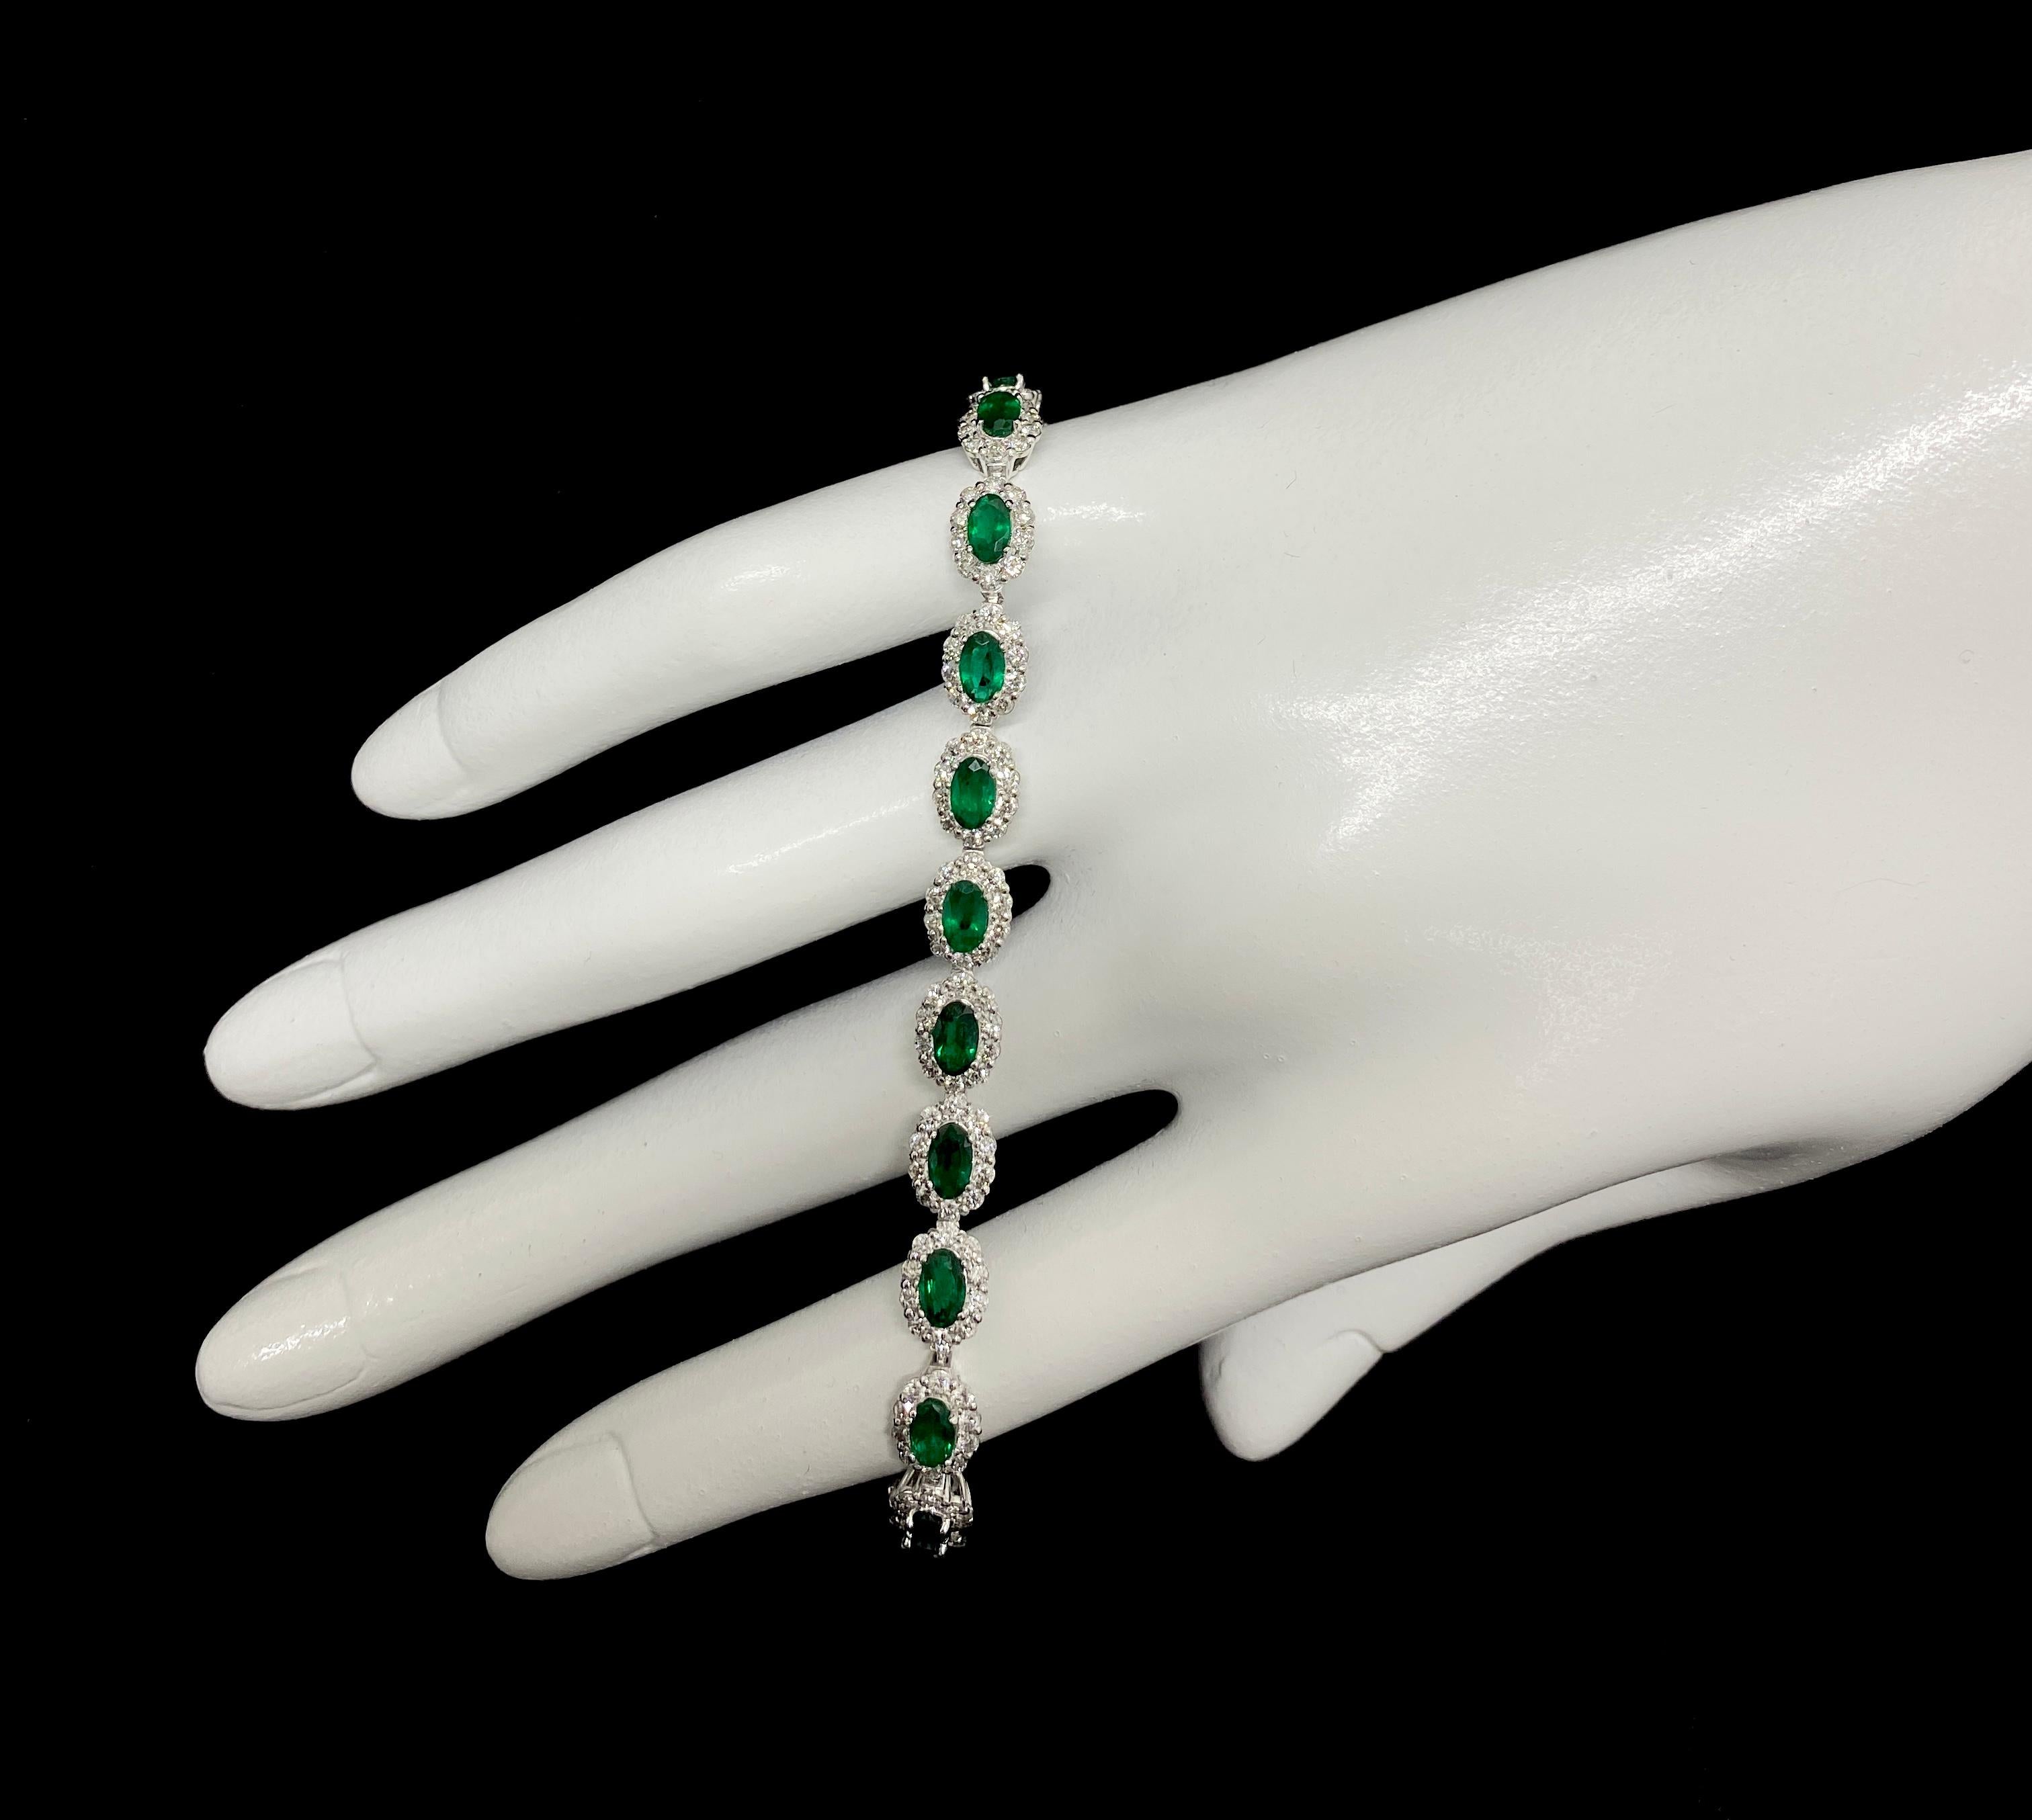 A beautiful Tennis Bracelet featuring a total of 4.55 Carats of Natural Emeralds and 1.74 Carats of Diamond Accents set in Platinum. The Emerald are of 5x3mm size. People have admired emerald’s green for thousands of years. Emeralds have always been